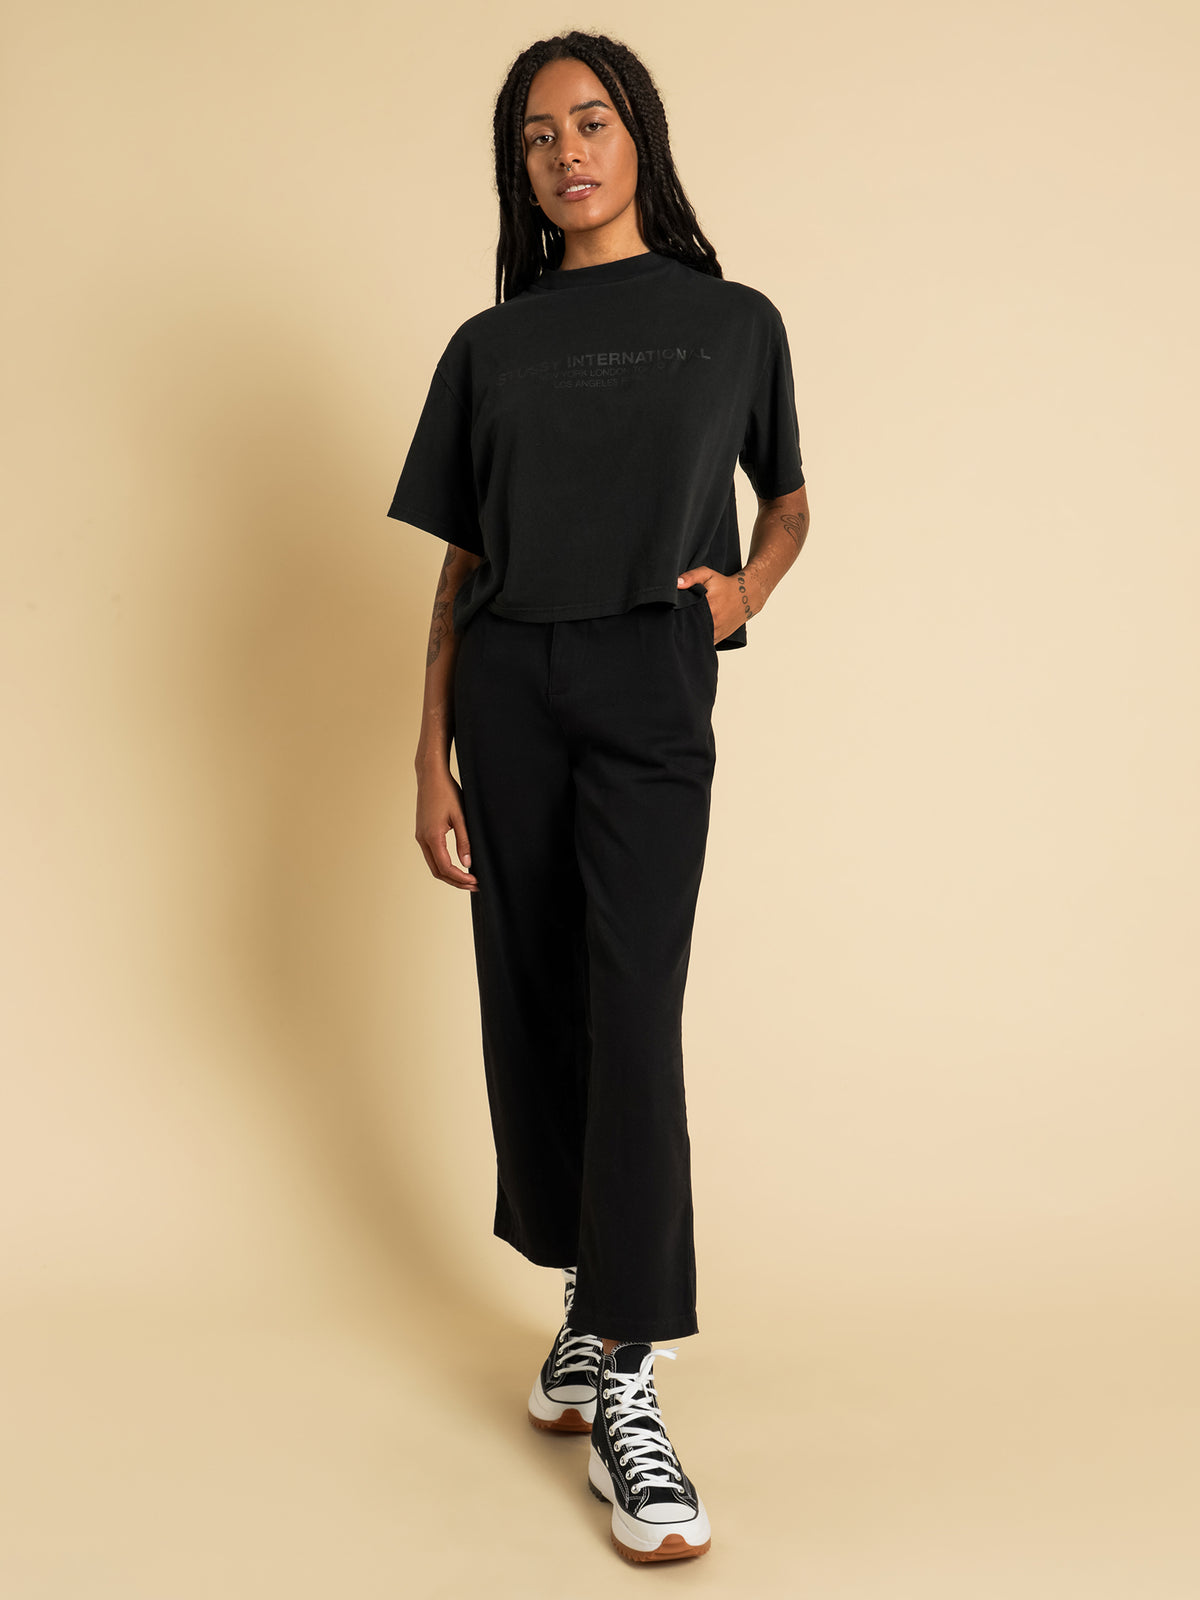 Lowry Chino Pants in Black